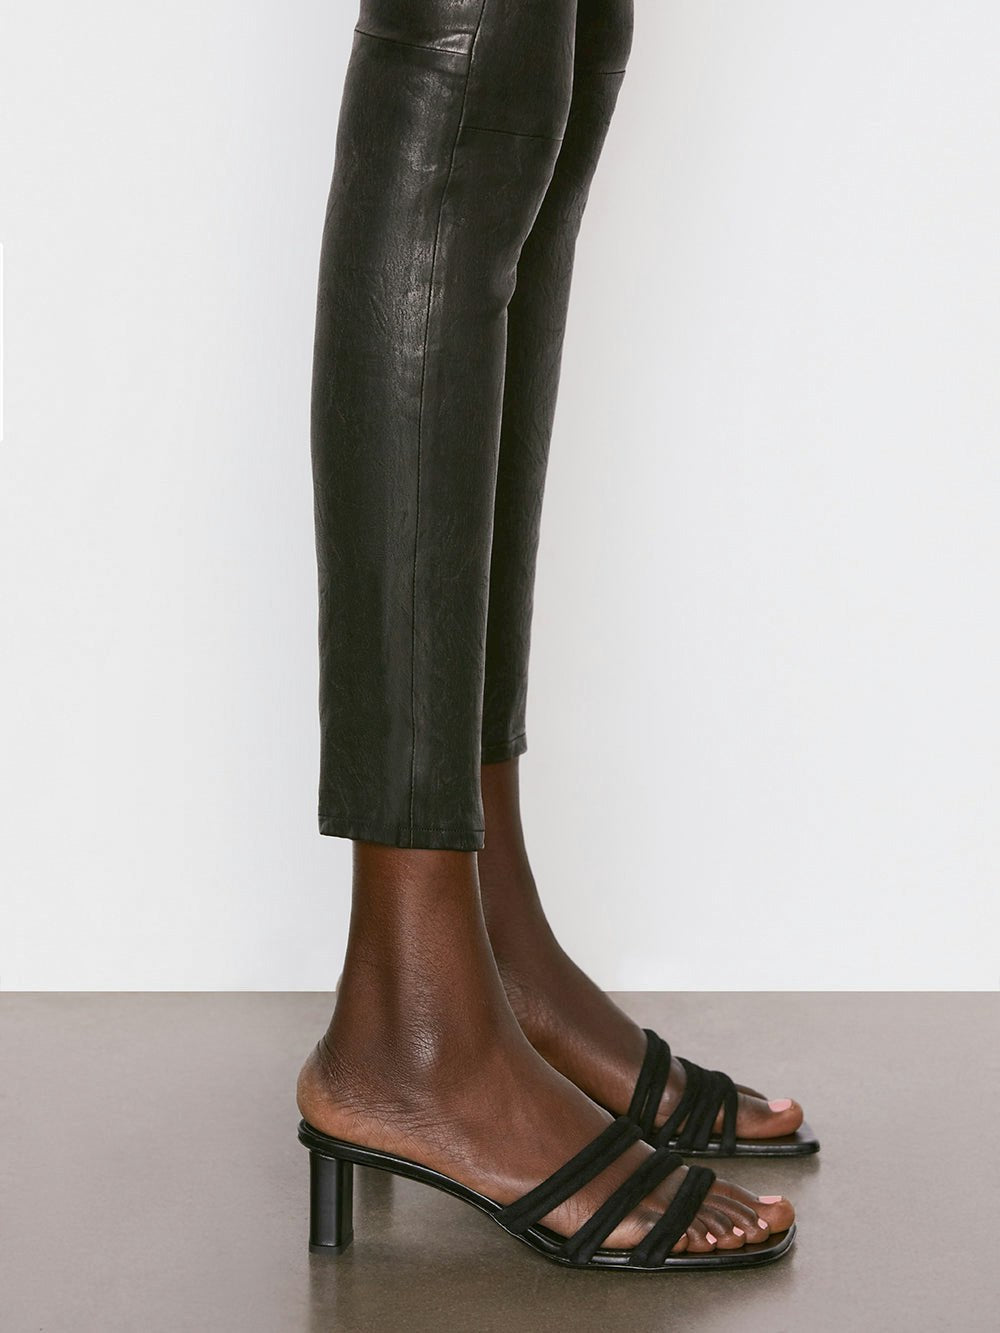 LEATHER LE HIGH SKINNY - WASHED BLACK